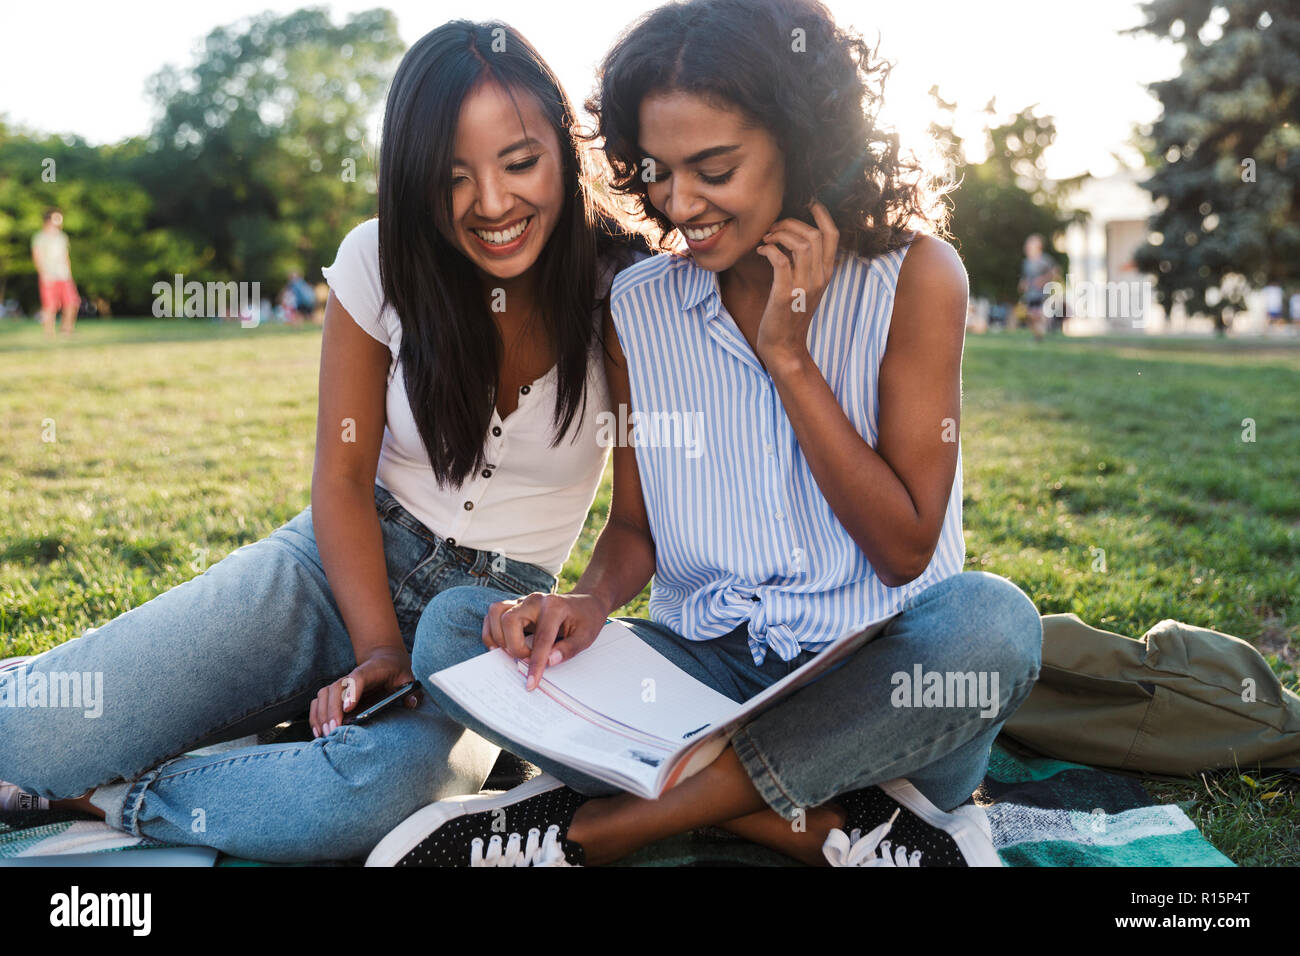 Image of happy smiling young friends girls outdoors in park doing homework. Stock Photo